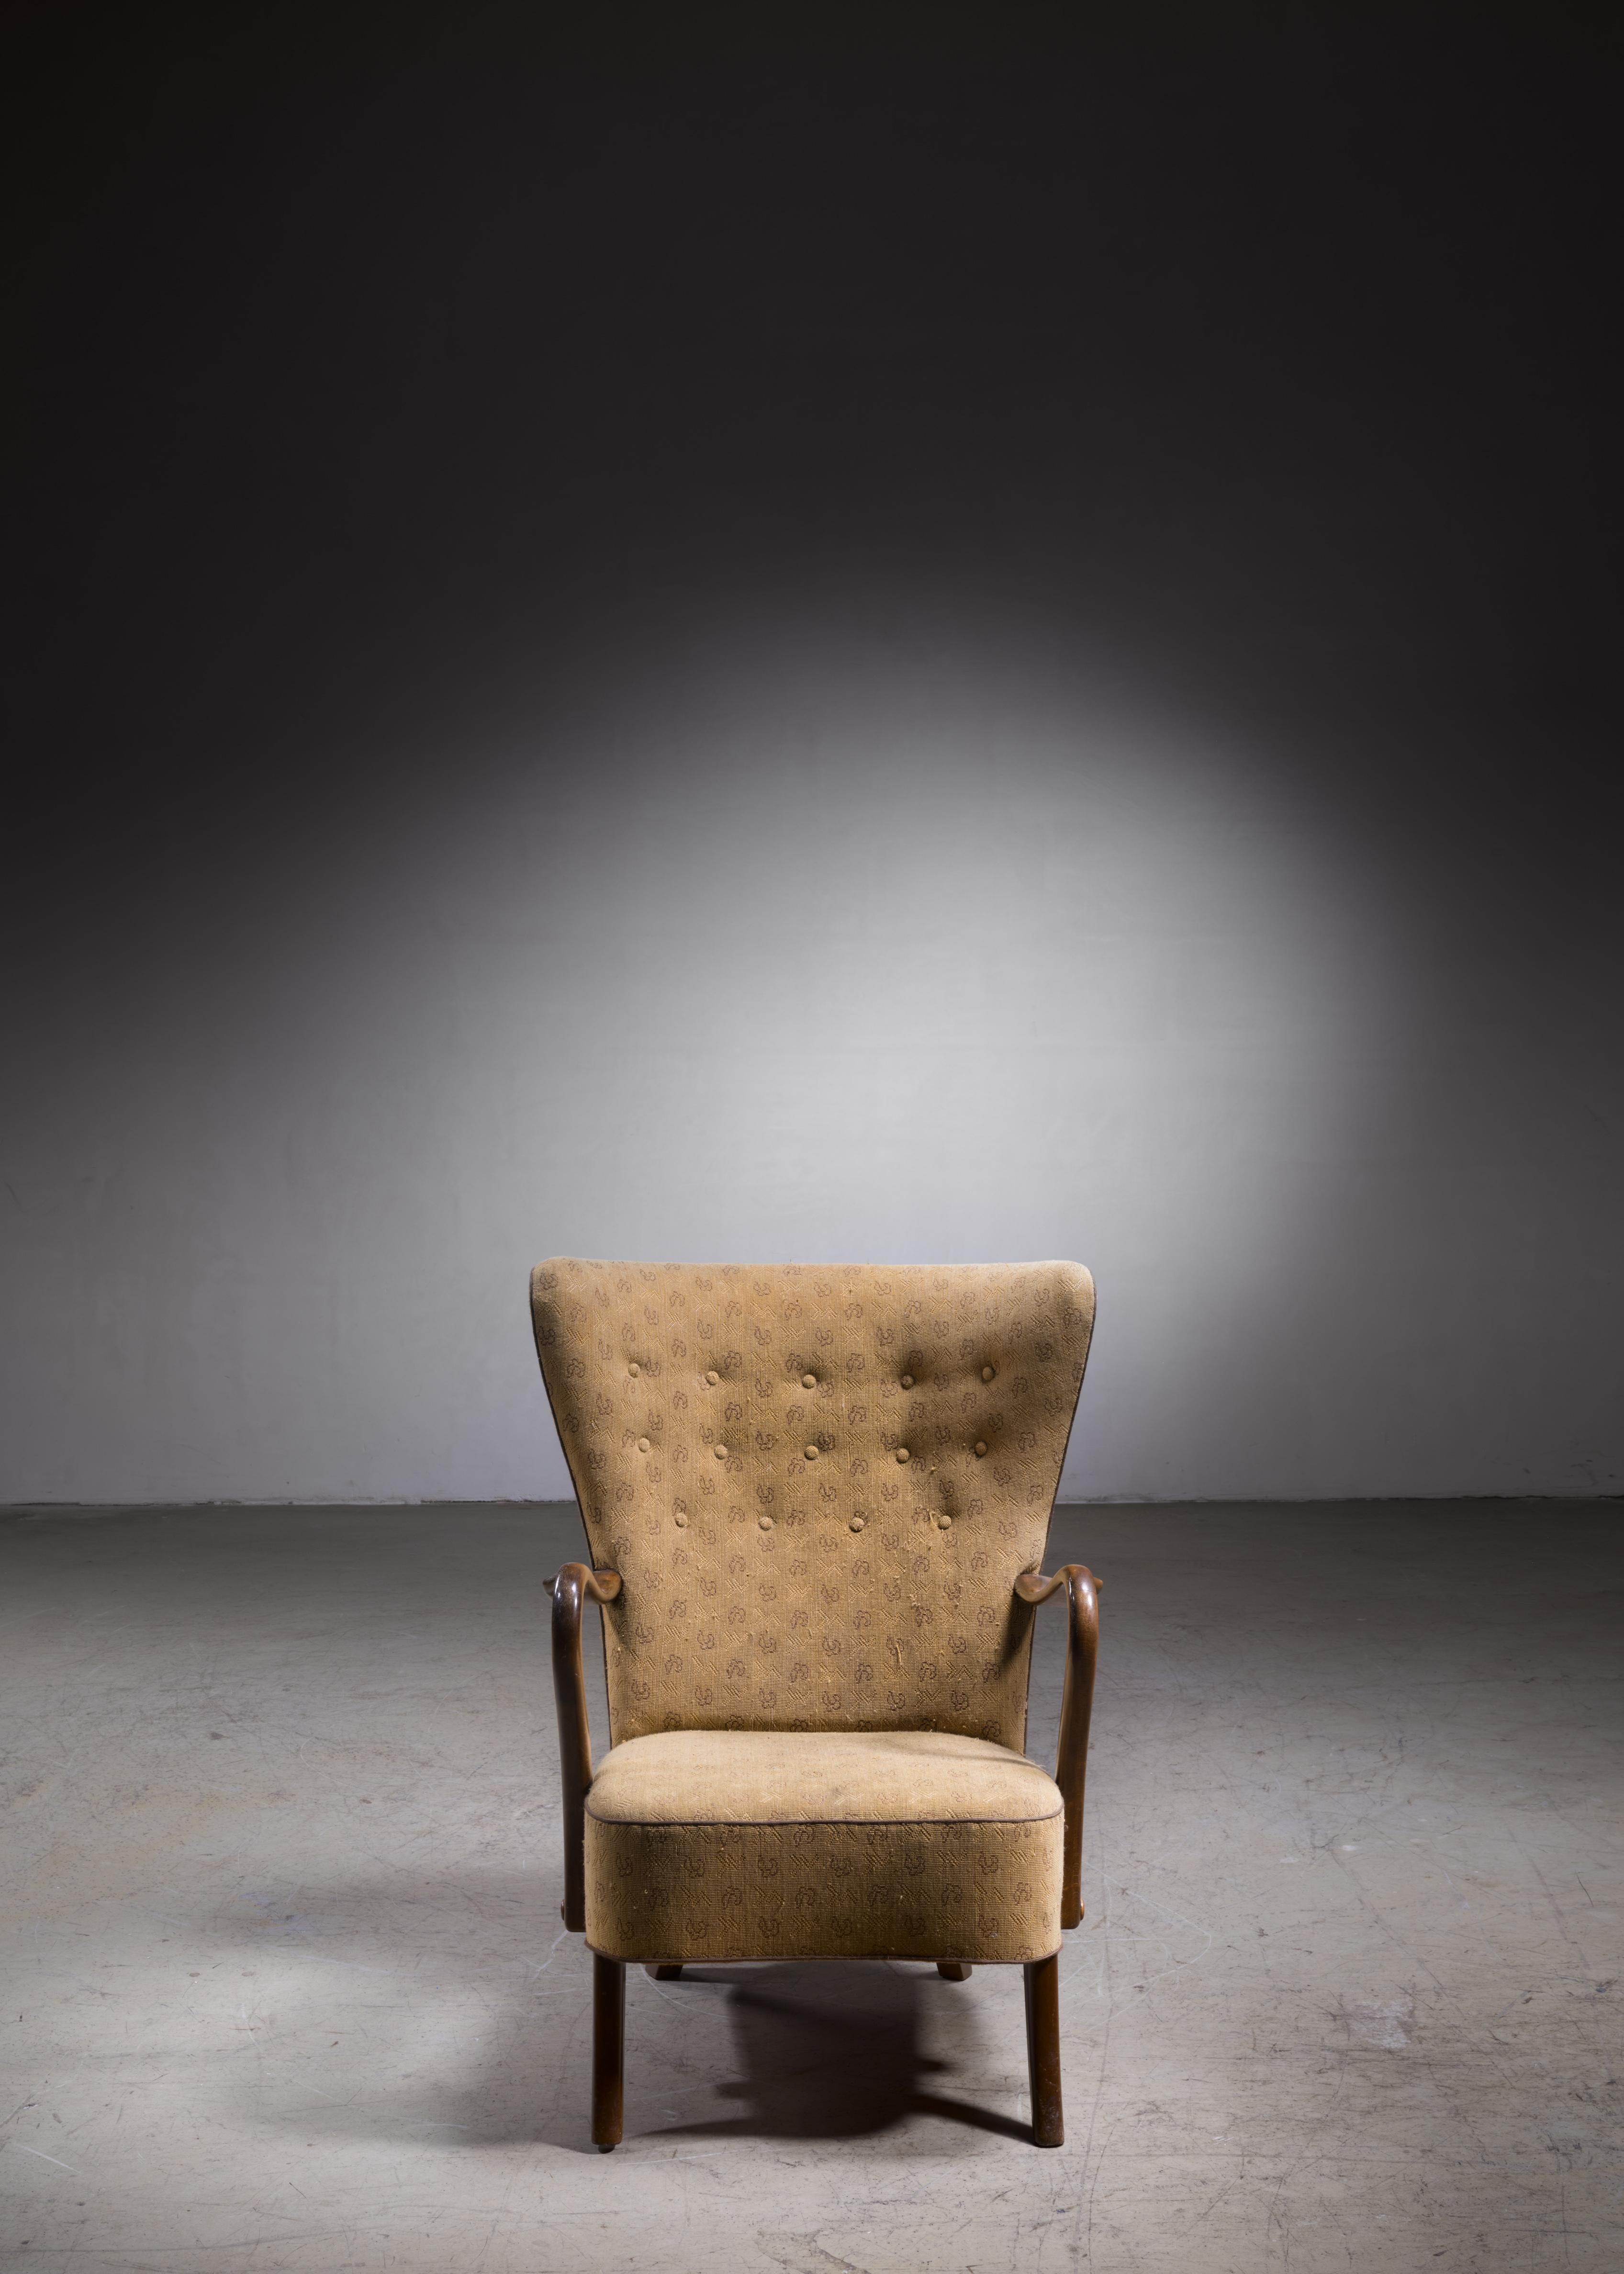 Scandinavian Modern Alfred Christensen Lounge Chair with Yellow Upholstery, Denmark, 1940s For Sale